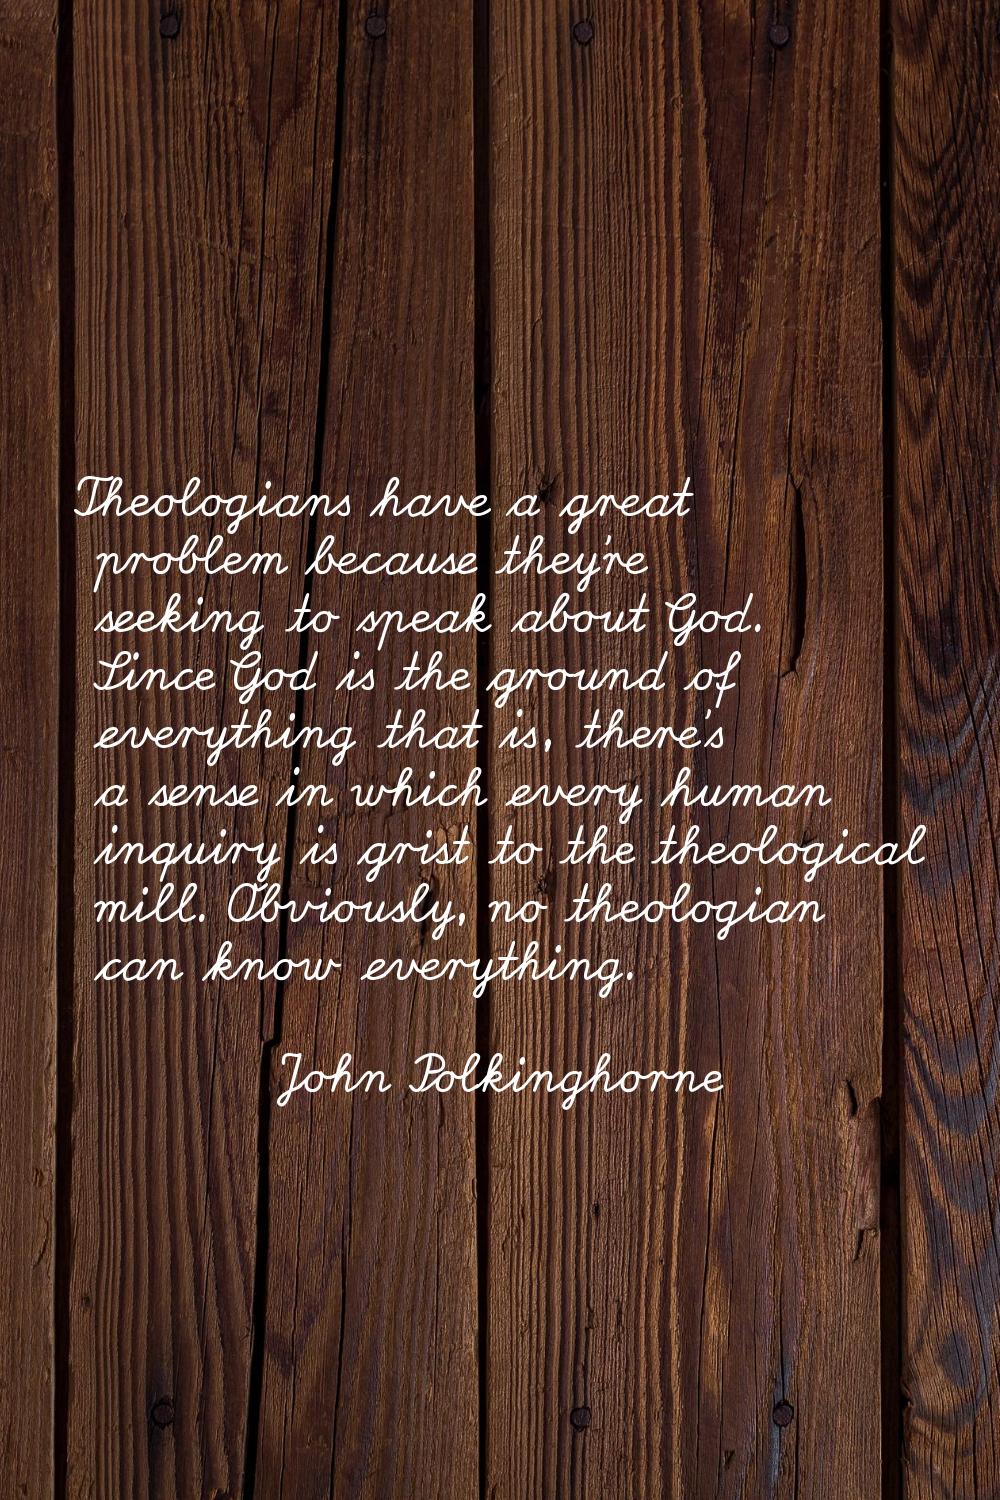 Theologians have a great problem because they're seeking to speak about God. Since God is the groun